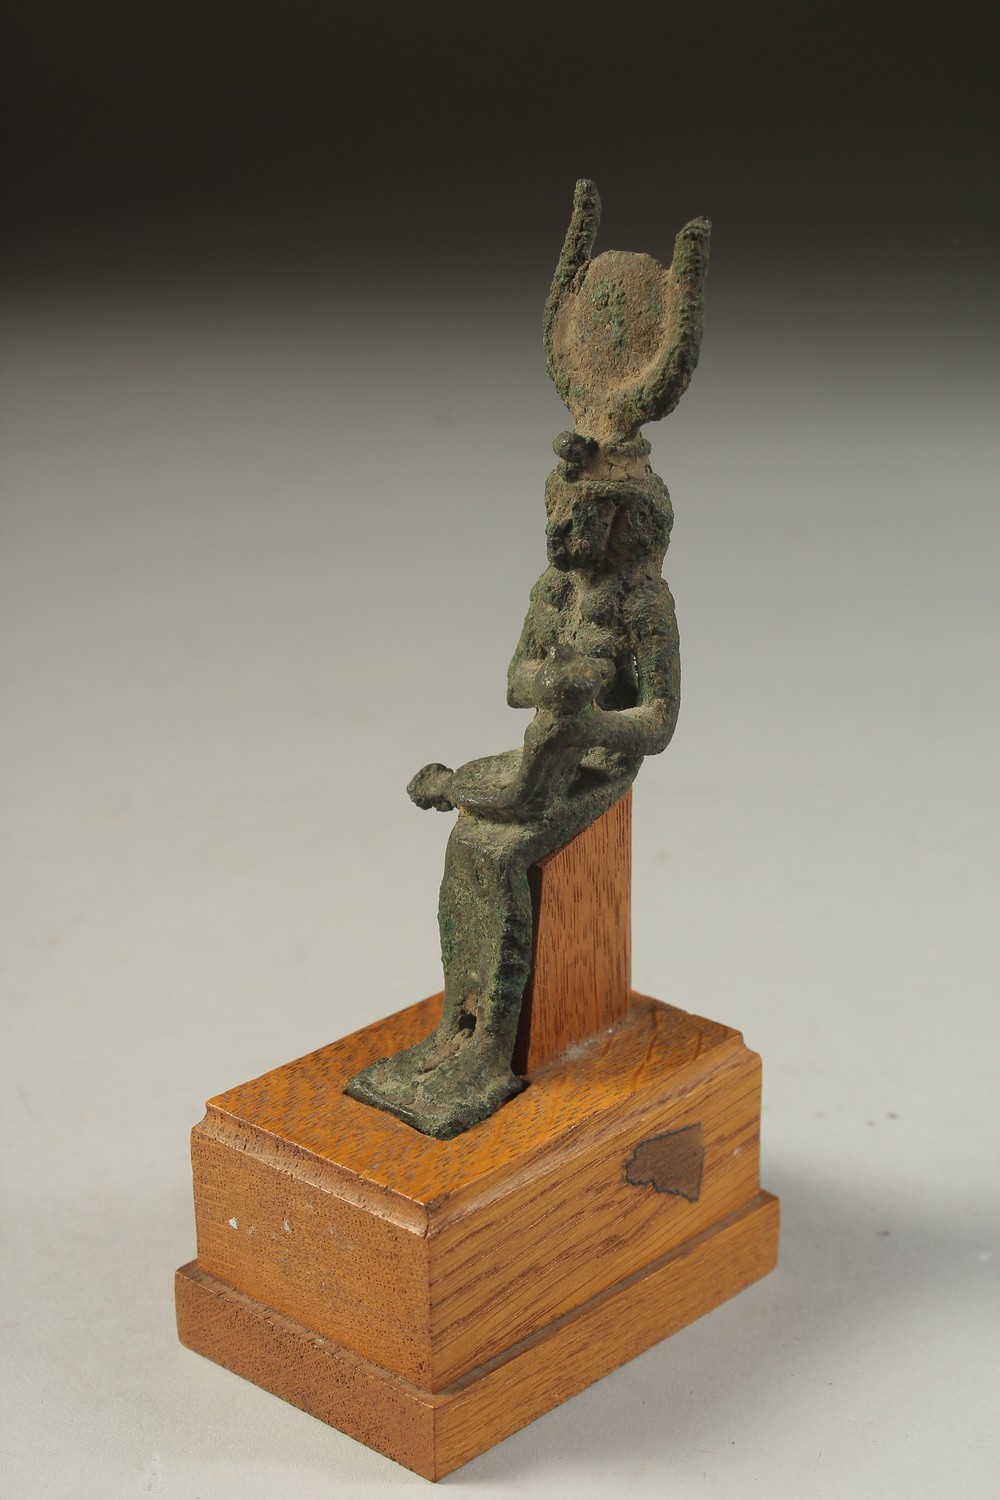 A RARE ANCIENT EYGPTIAN BRONZE FIGURE OF ISIS NURTURING HORUS, on a wooden stand, bronze 12cm high.